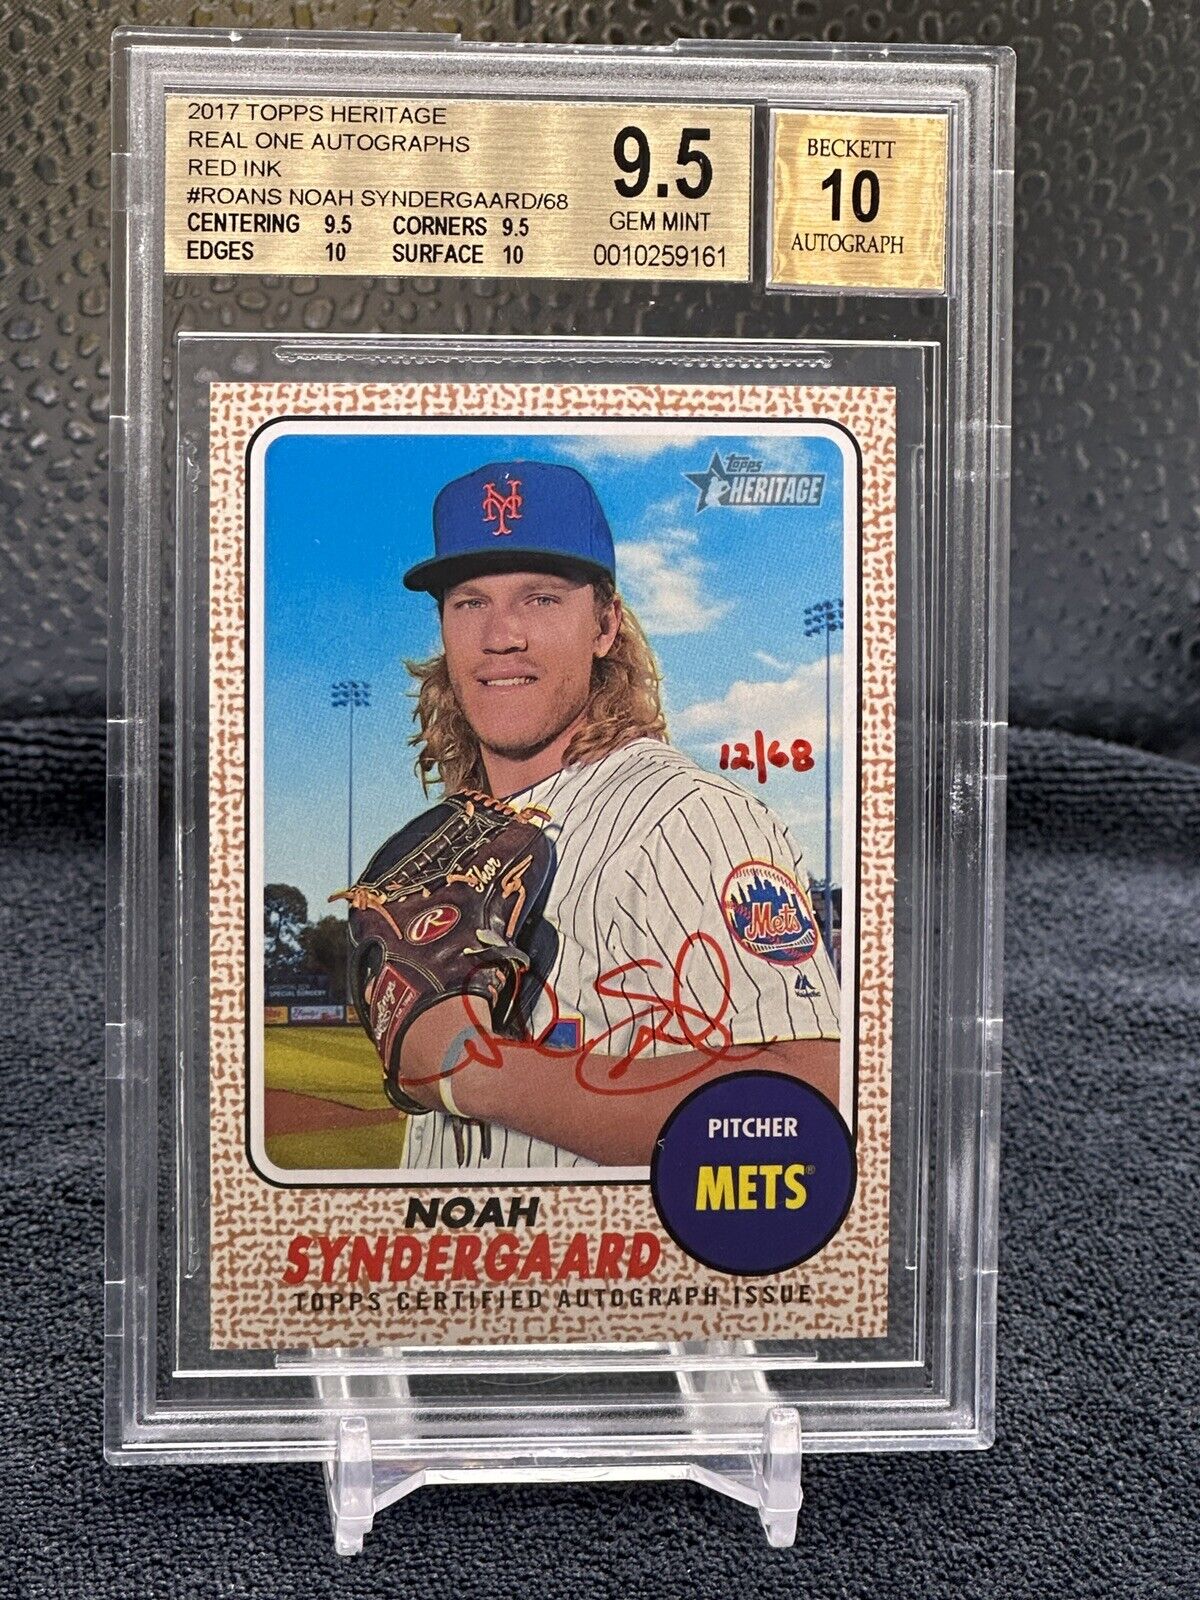 2017 Topps Heritage Noah Syndergaard Real One Autographs Red Ink #12/68 BGS 9.5